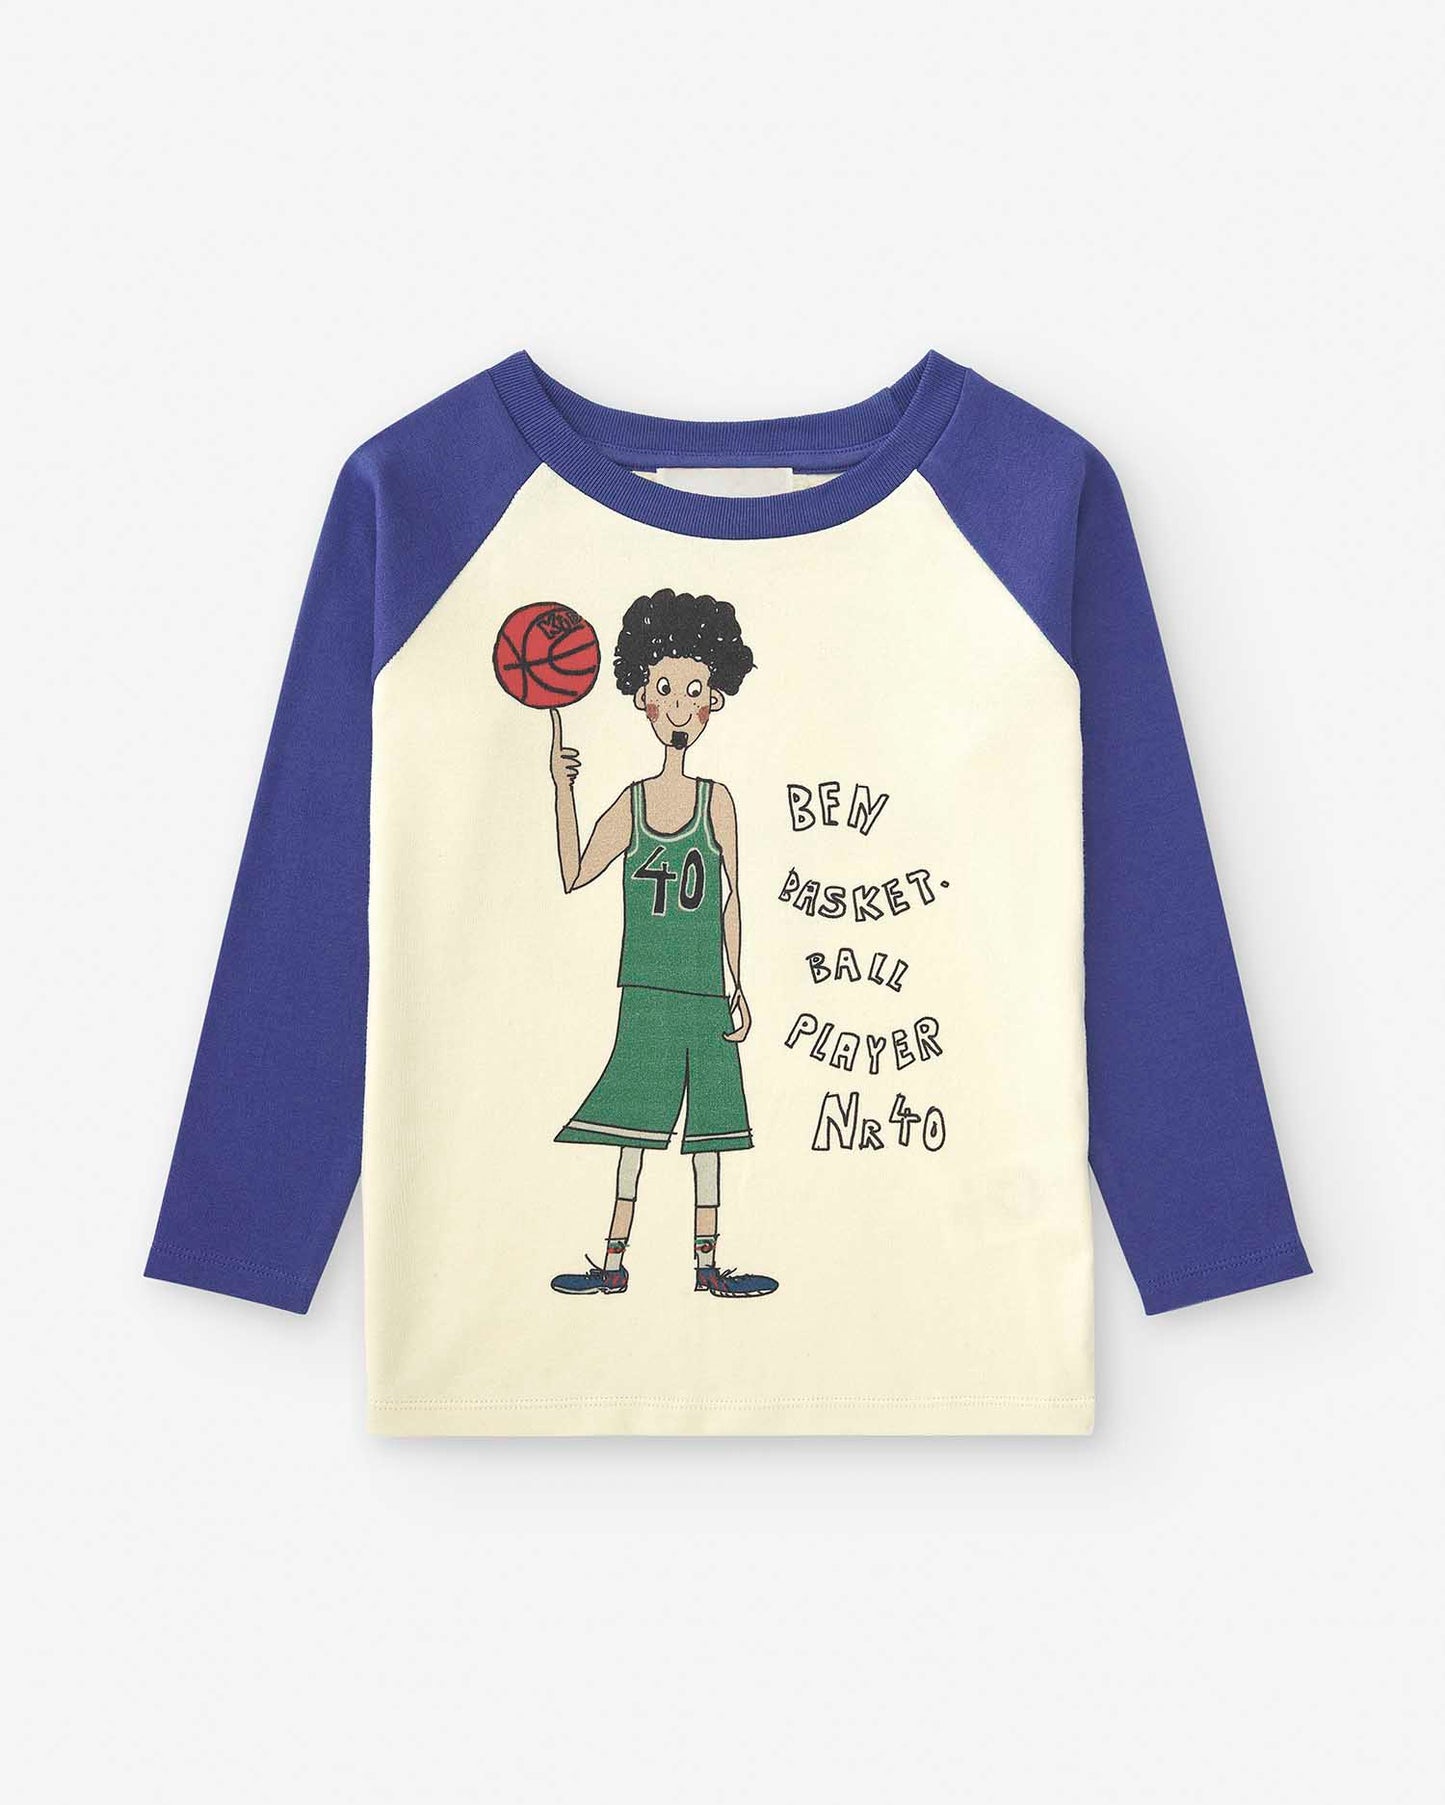 T SHIRT WILL, THE BASKETBALL PLAYER